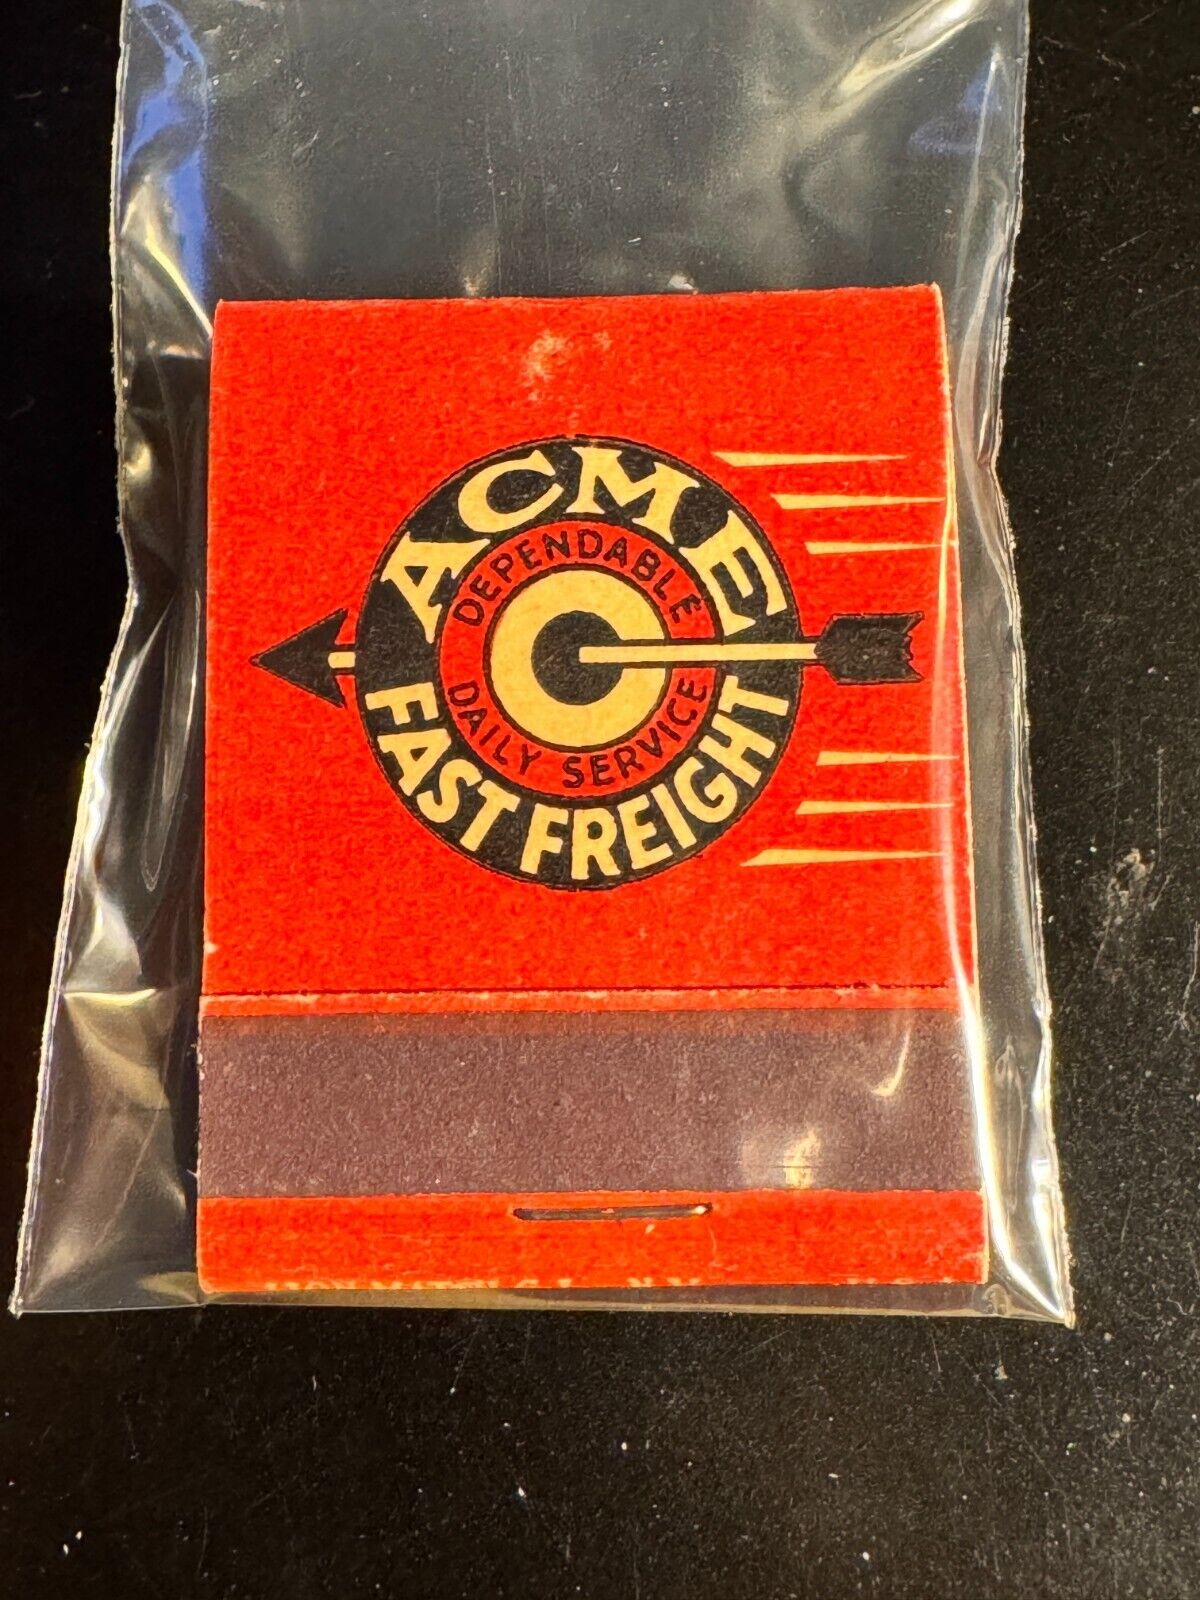 MATCHBOOK - ACME FAST FREIGHT - DEPENDABLE DAILY SERVICE - UNSTRUCK